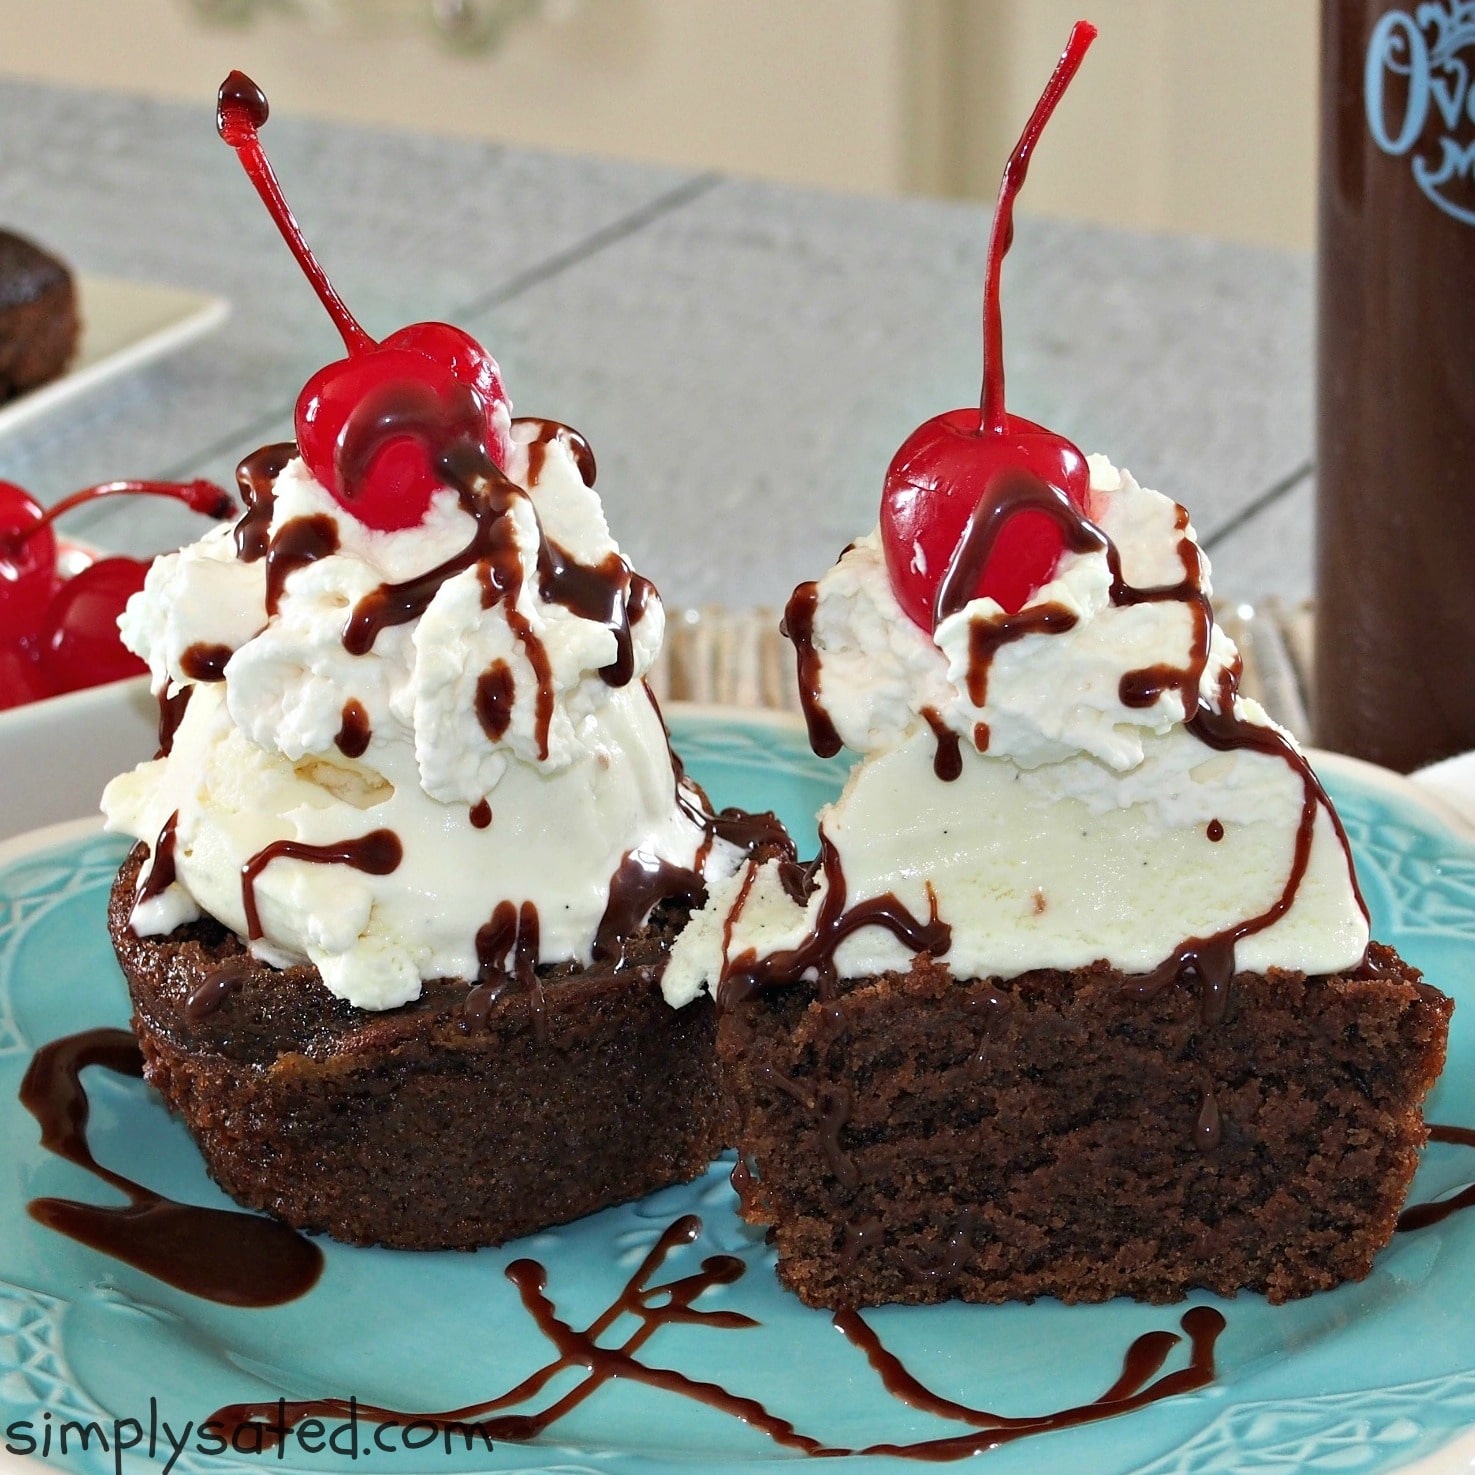 Beautiful and yummy! Dessert can't get better than this gorgeous Hot Fudge Sundae Cupcake with layers of chocolate cake, ice cream, homemade hot fudge sauce, whipped cream with a cherry on top. www.simplysated.com